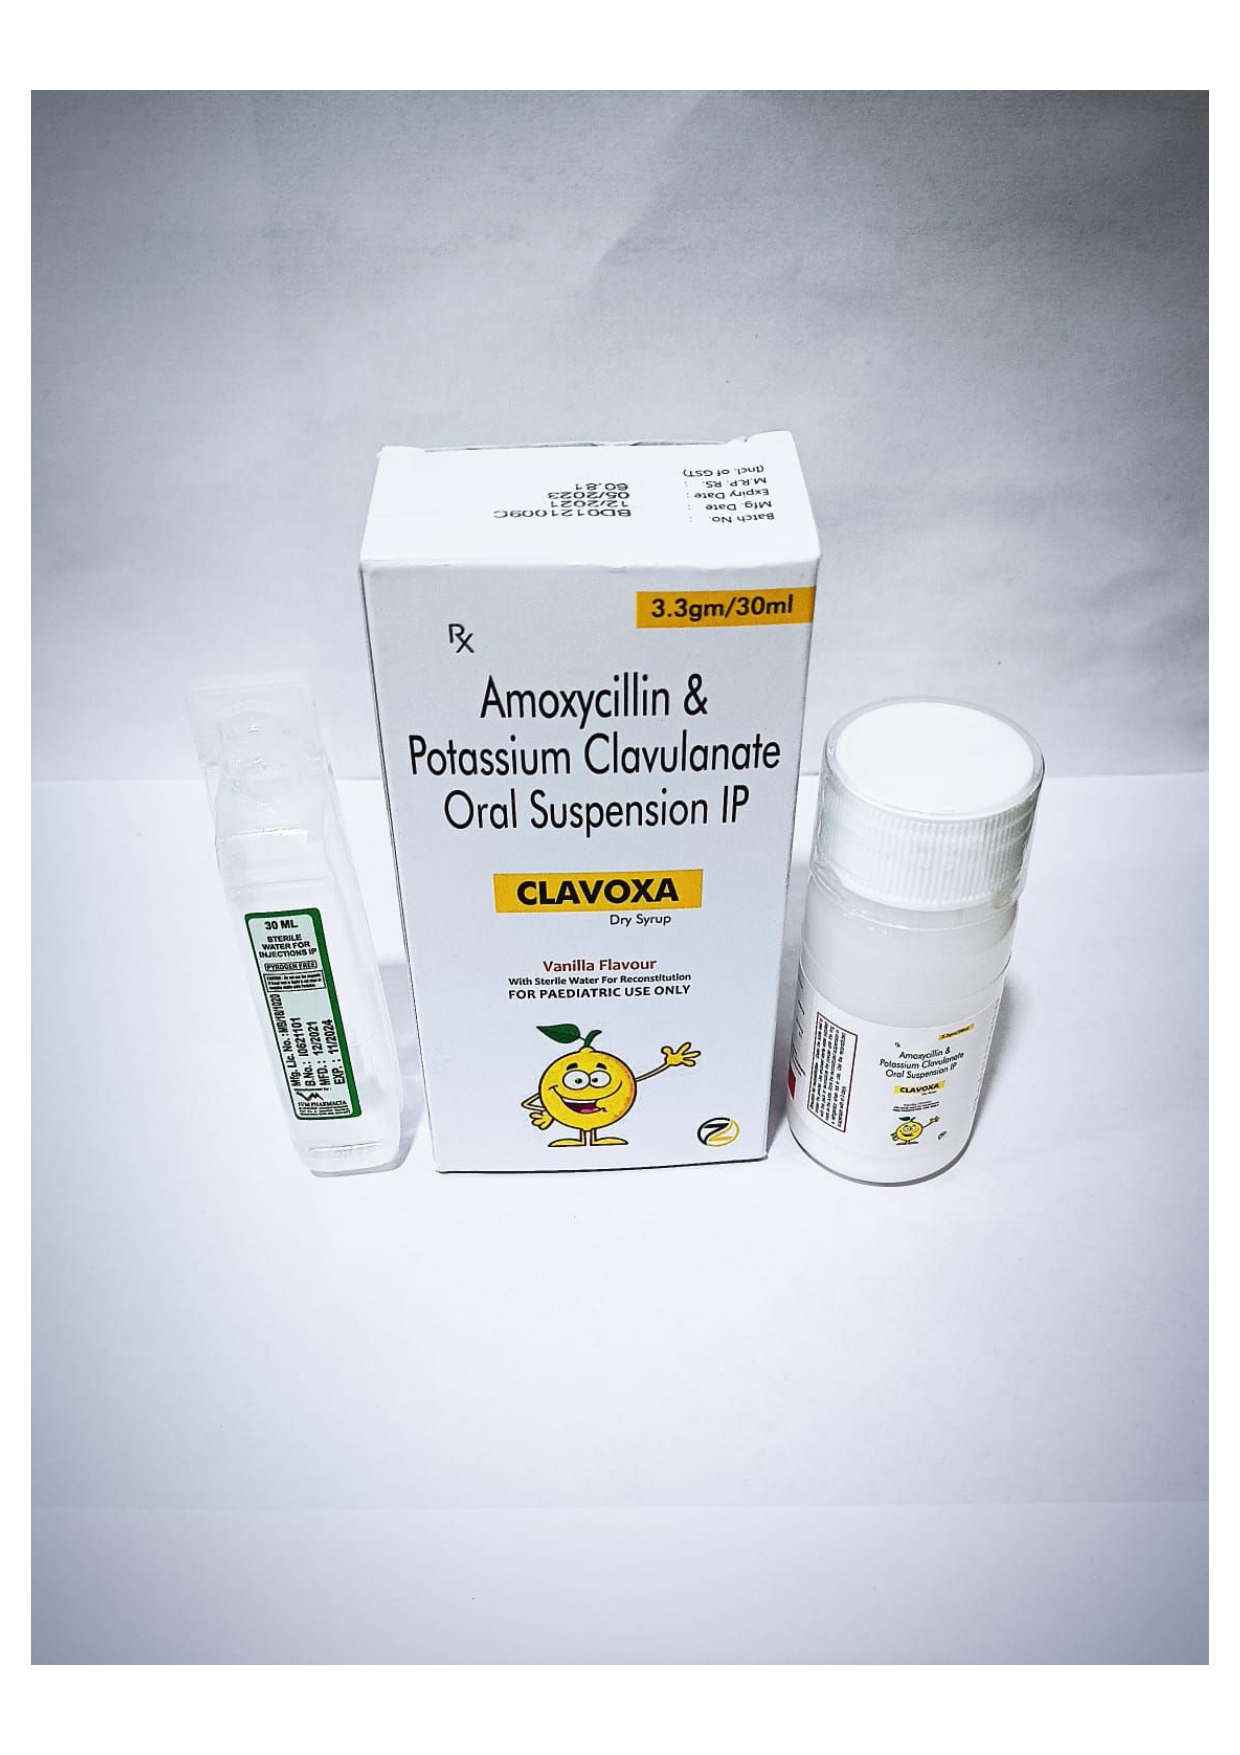 amoxycillin trihydrate 200mg with clavulanic acid 28.5mg dry syrup
with distilled water